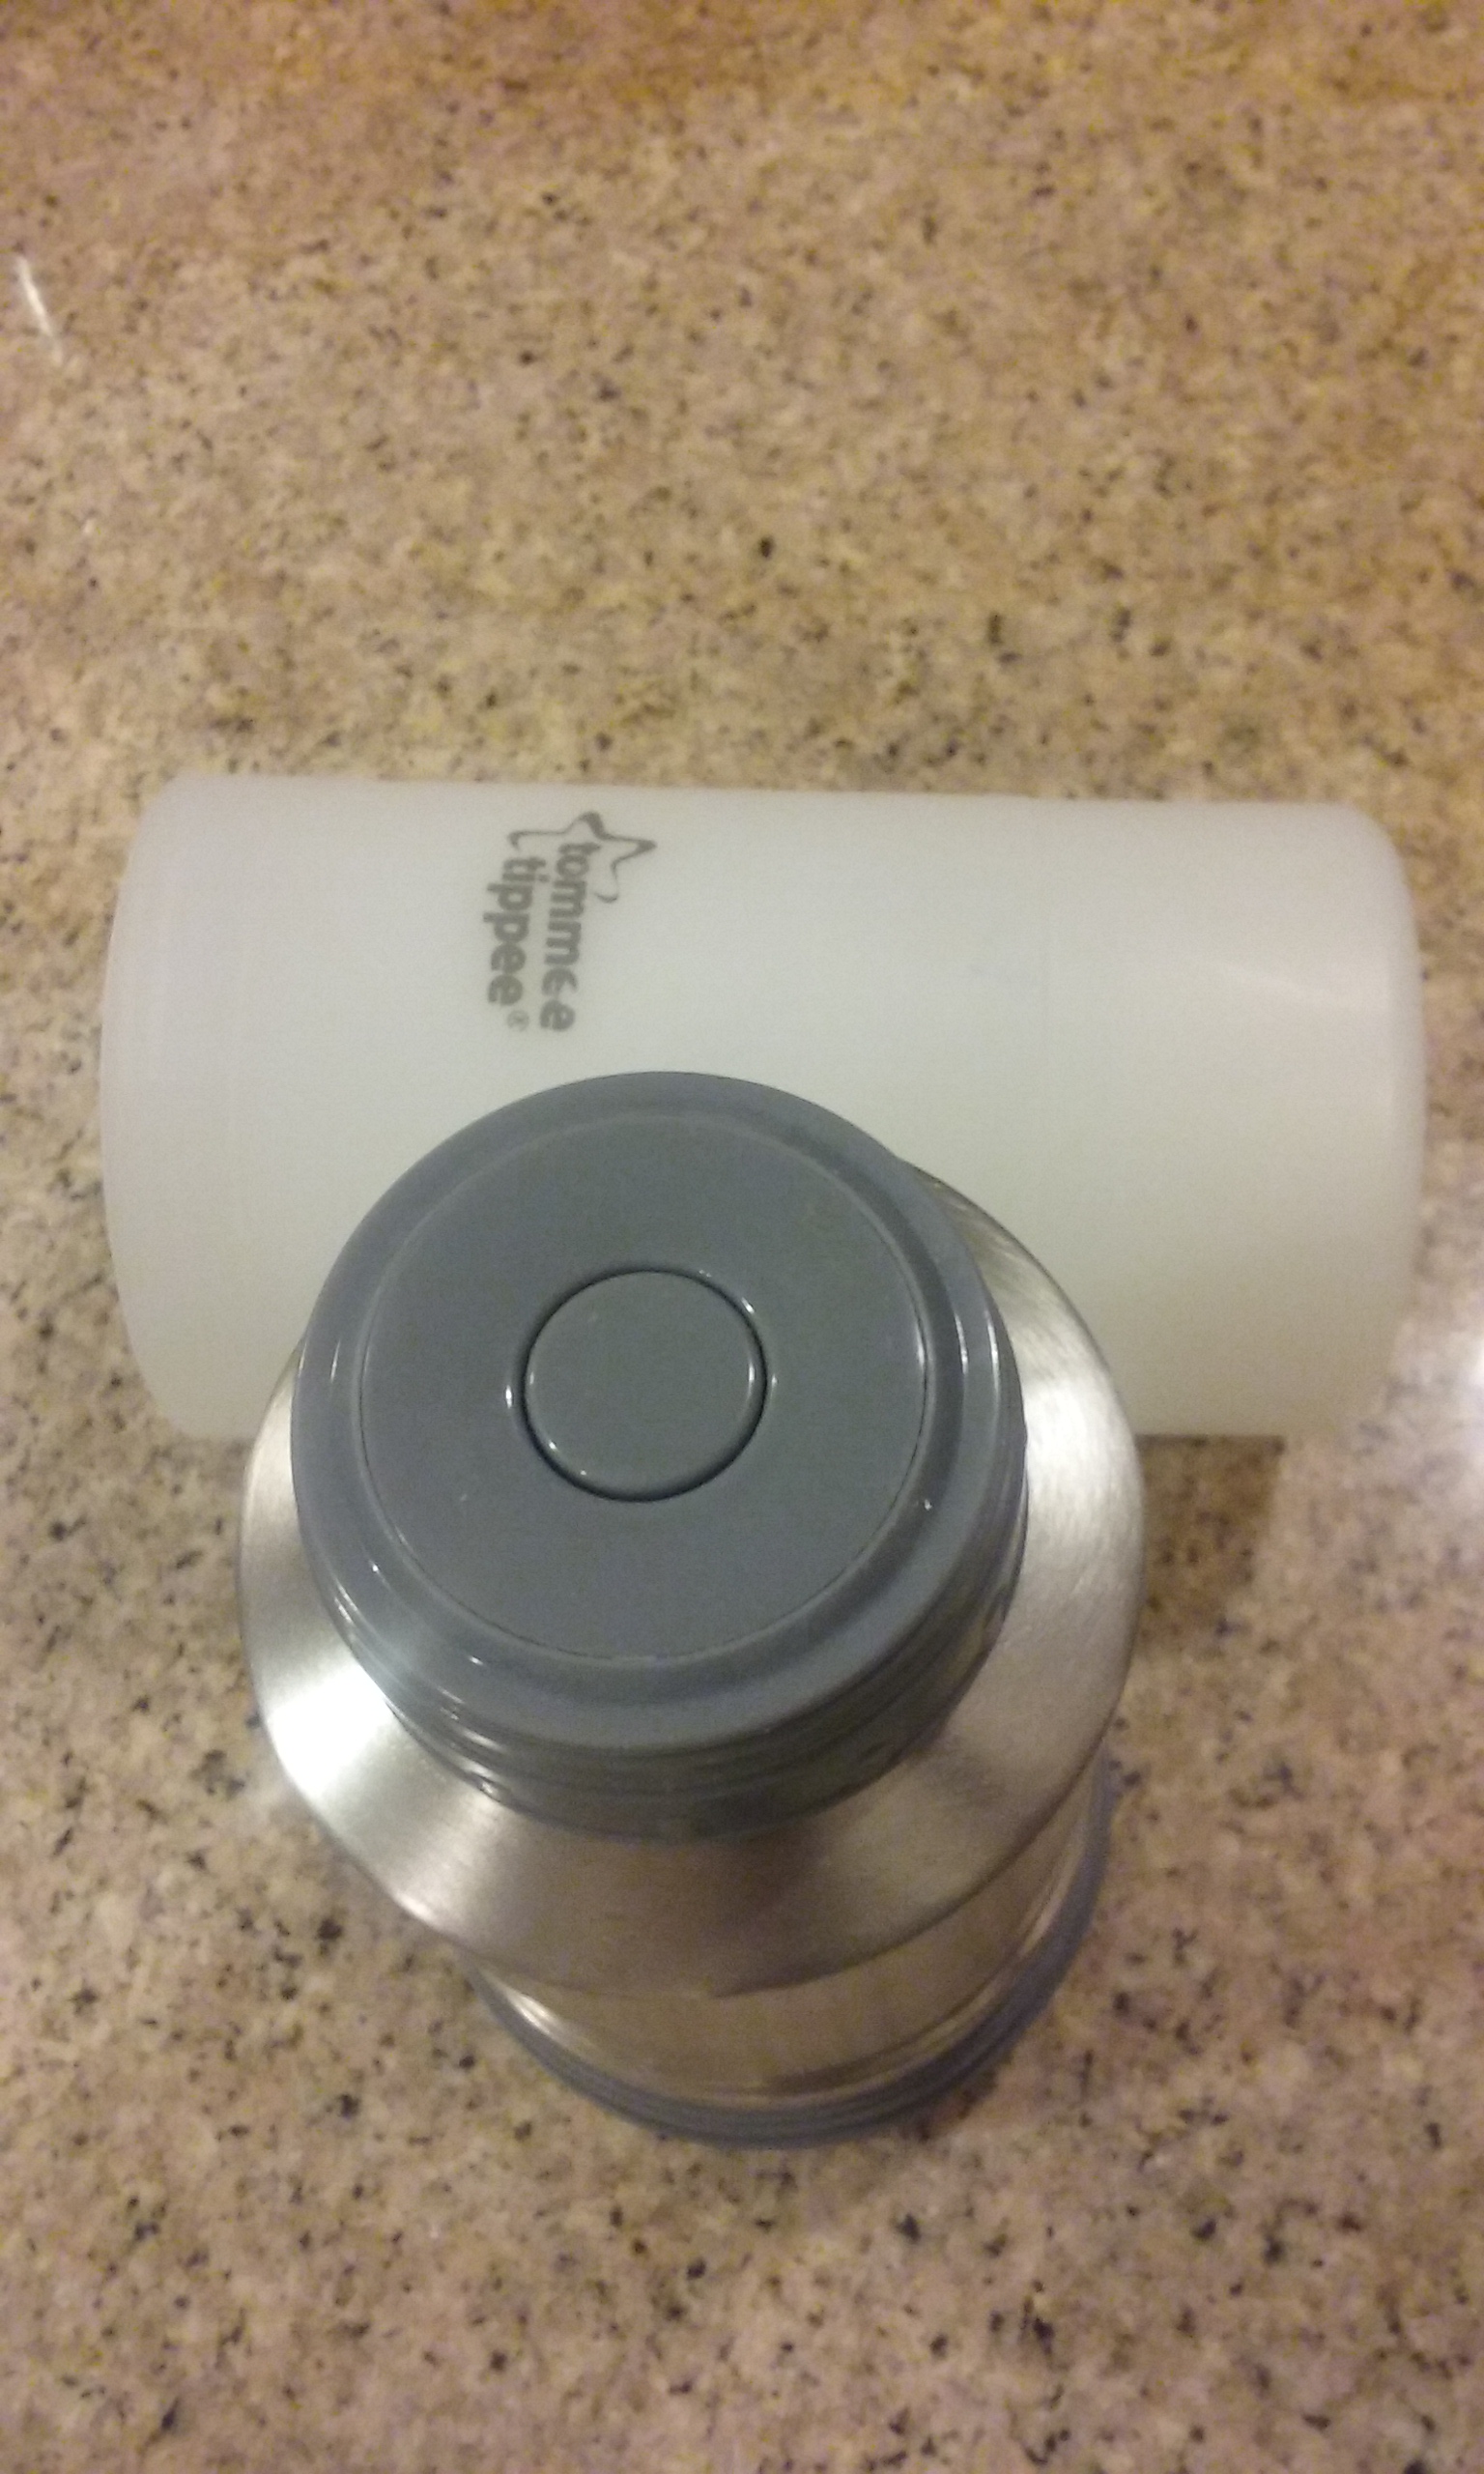 Our Tommee Tippee Travel Warmer.jpg